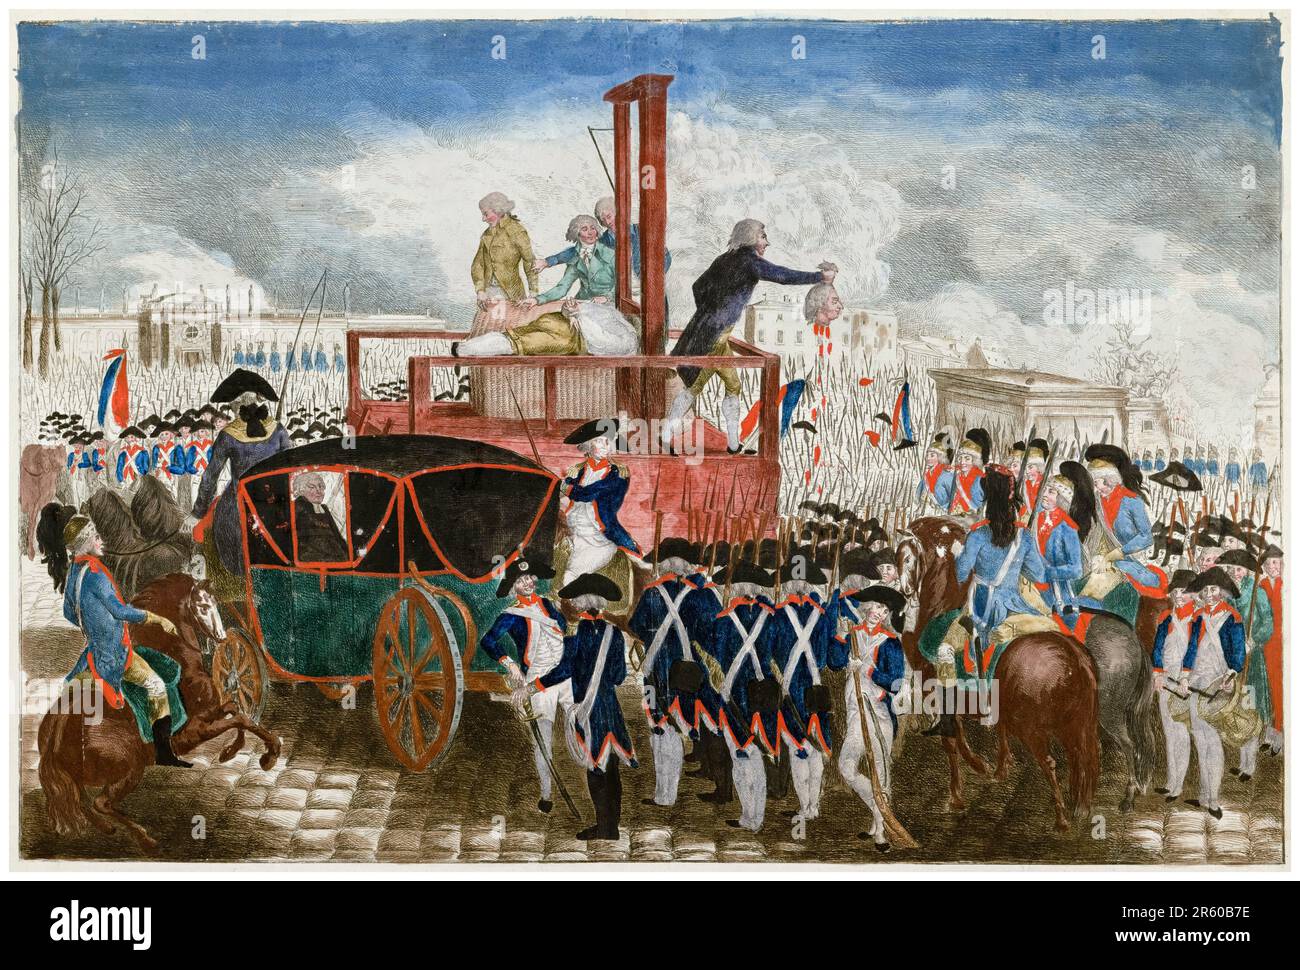 French Revolution, The Death of Louis XVI, Execution of Louis XVI on the Guillotine, 21st January 1793, engraving by unknown artist, 1793 Stock Photo